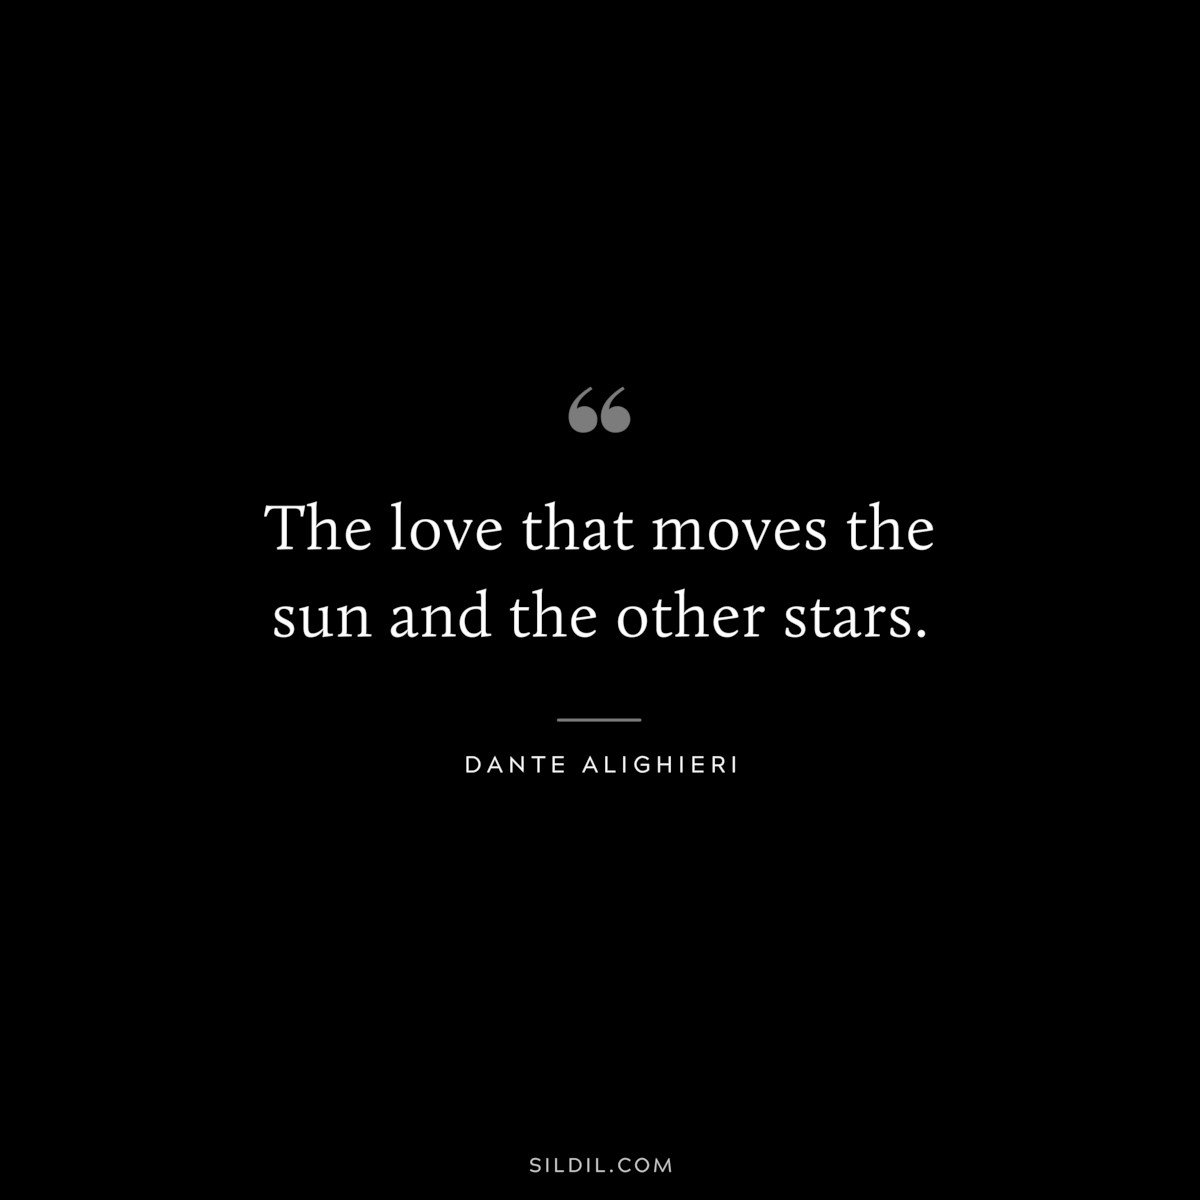 The love that moves the sun and the other stars. ― Dante Alighieri